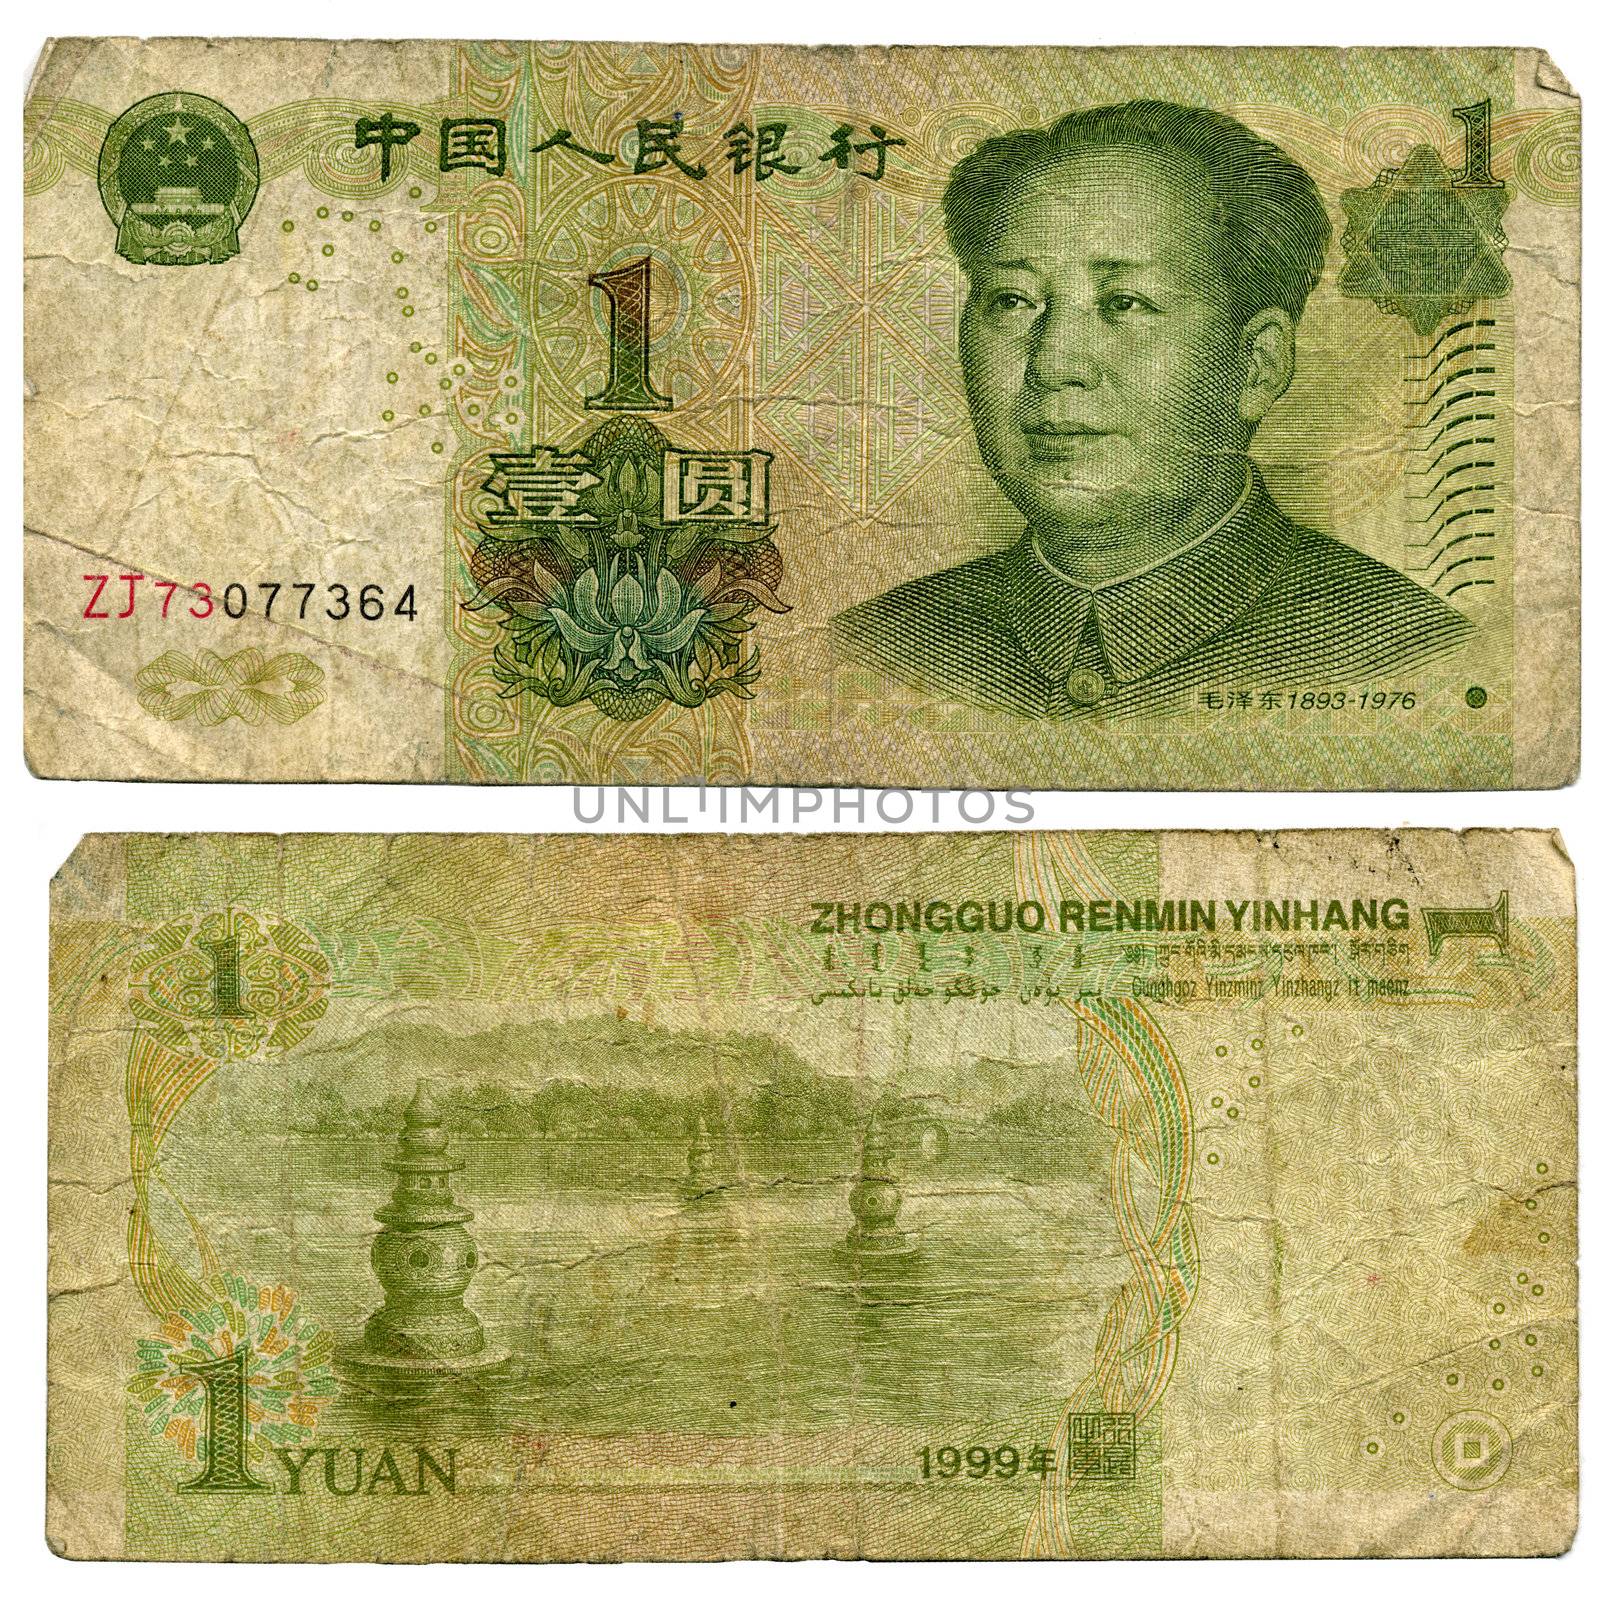 Chinese yuan front and back view